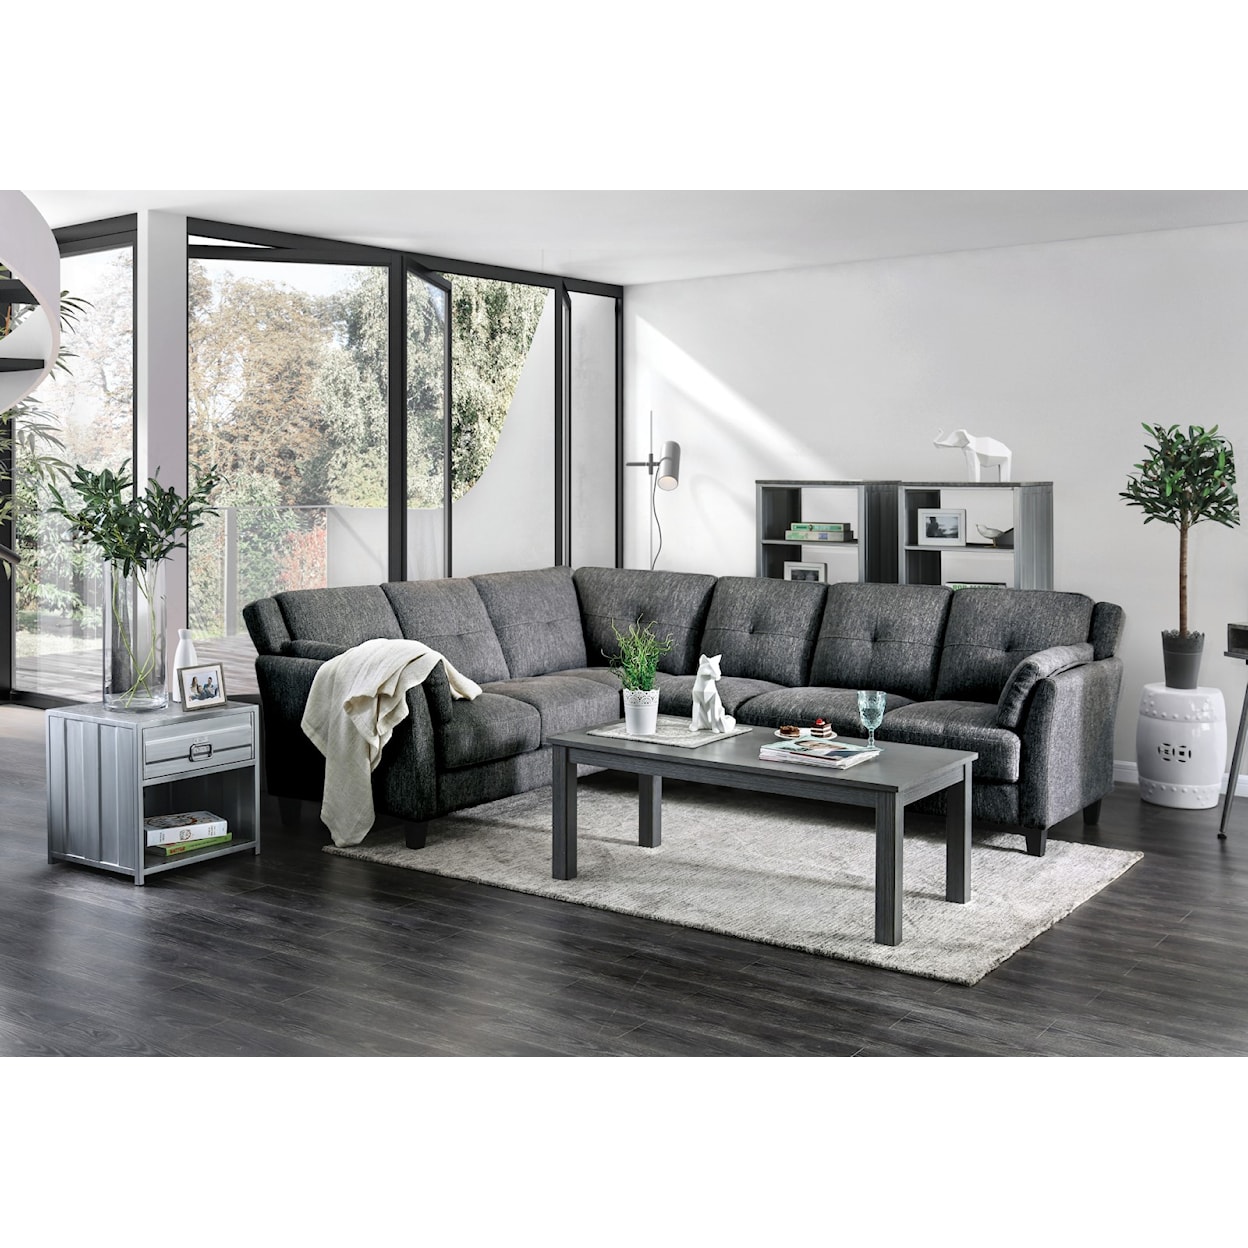 Furniture of America Kaleigh Sectional